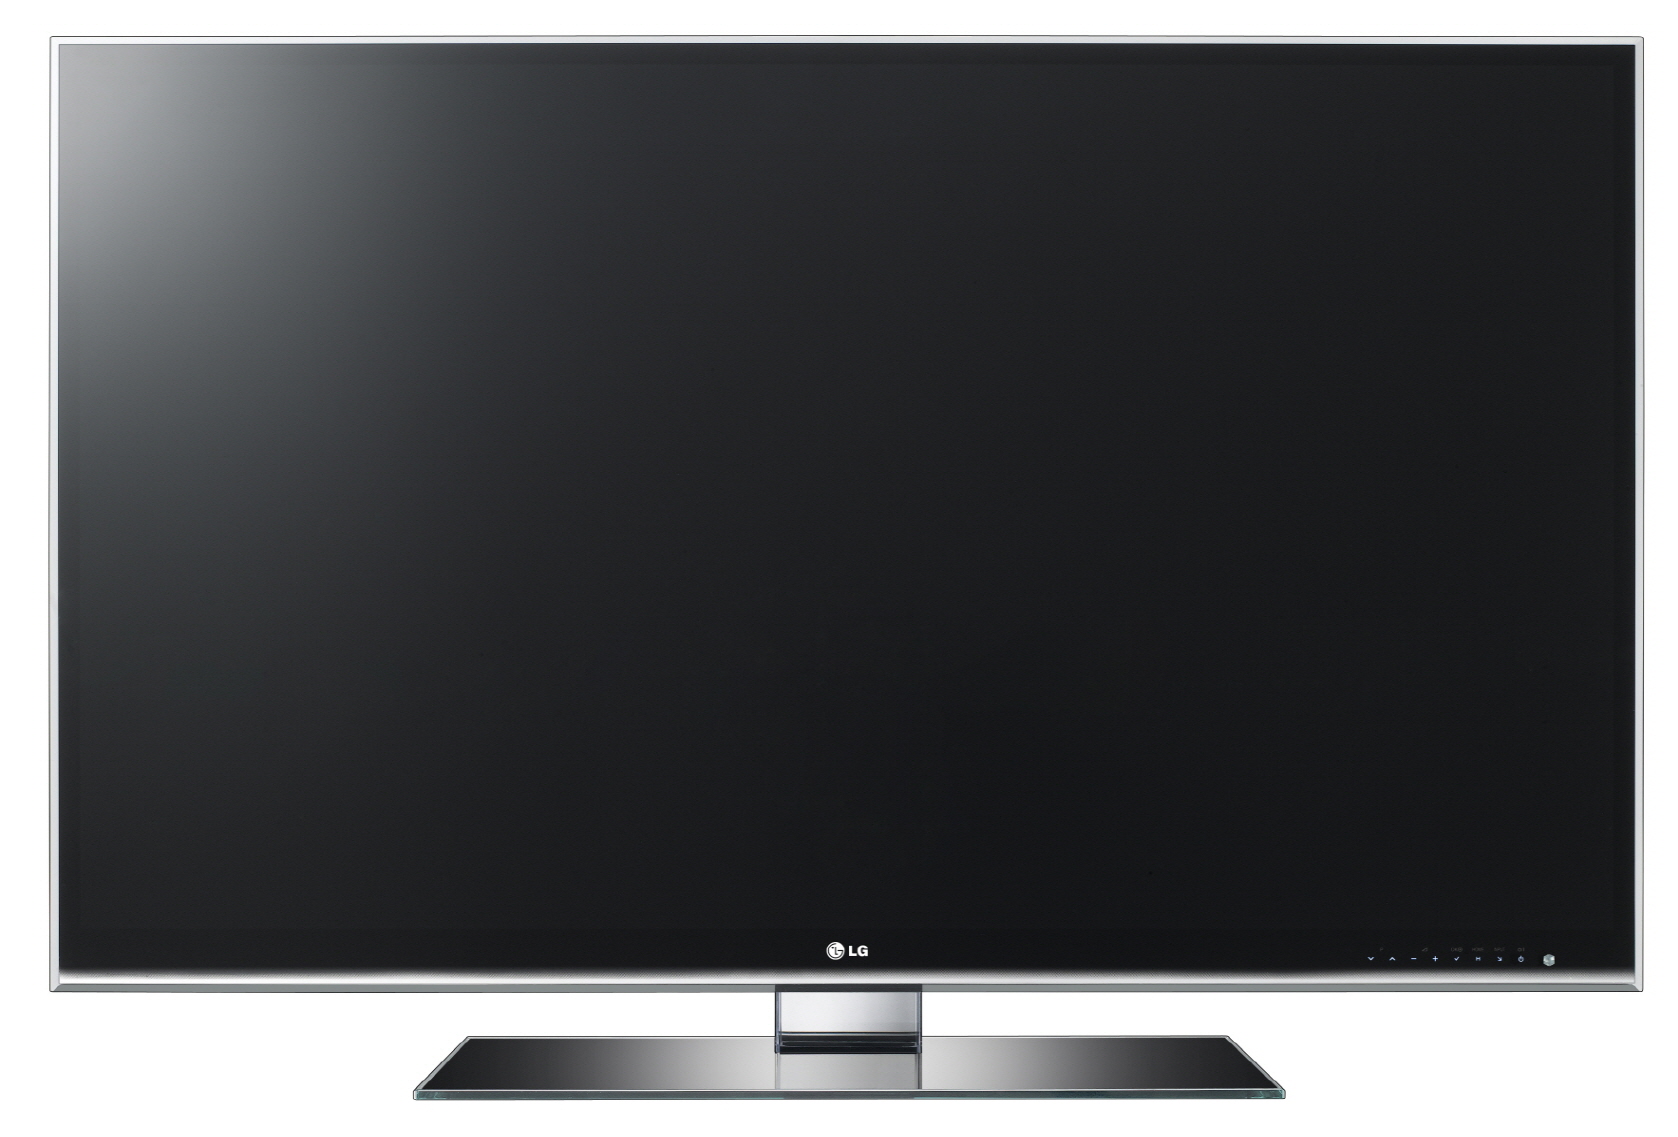 Front view of the LG CINEMA 3D TV model LW980S